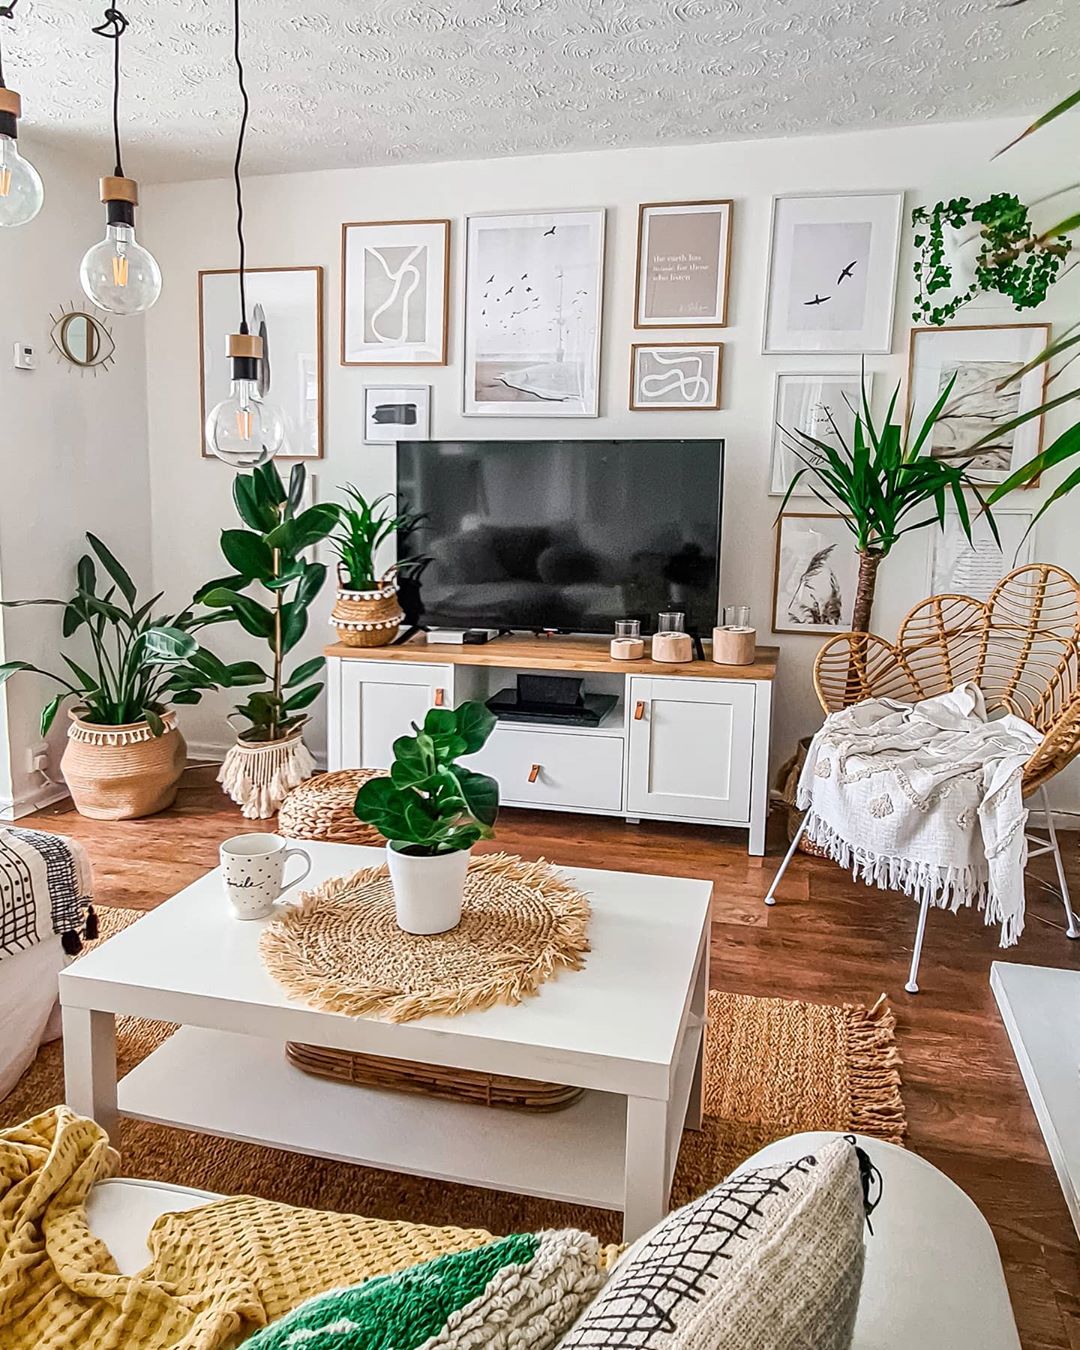 15 Simple Small Living Room Ideas Brimming With Style - Decoholic